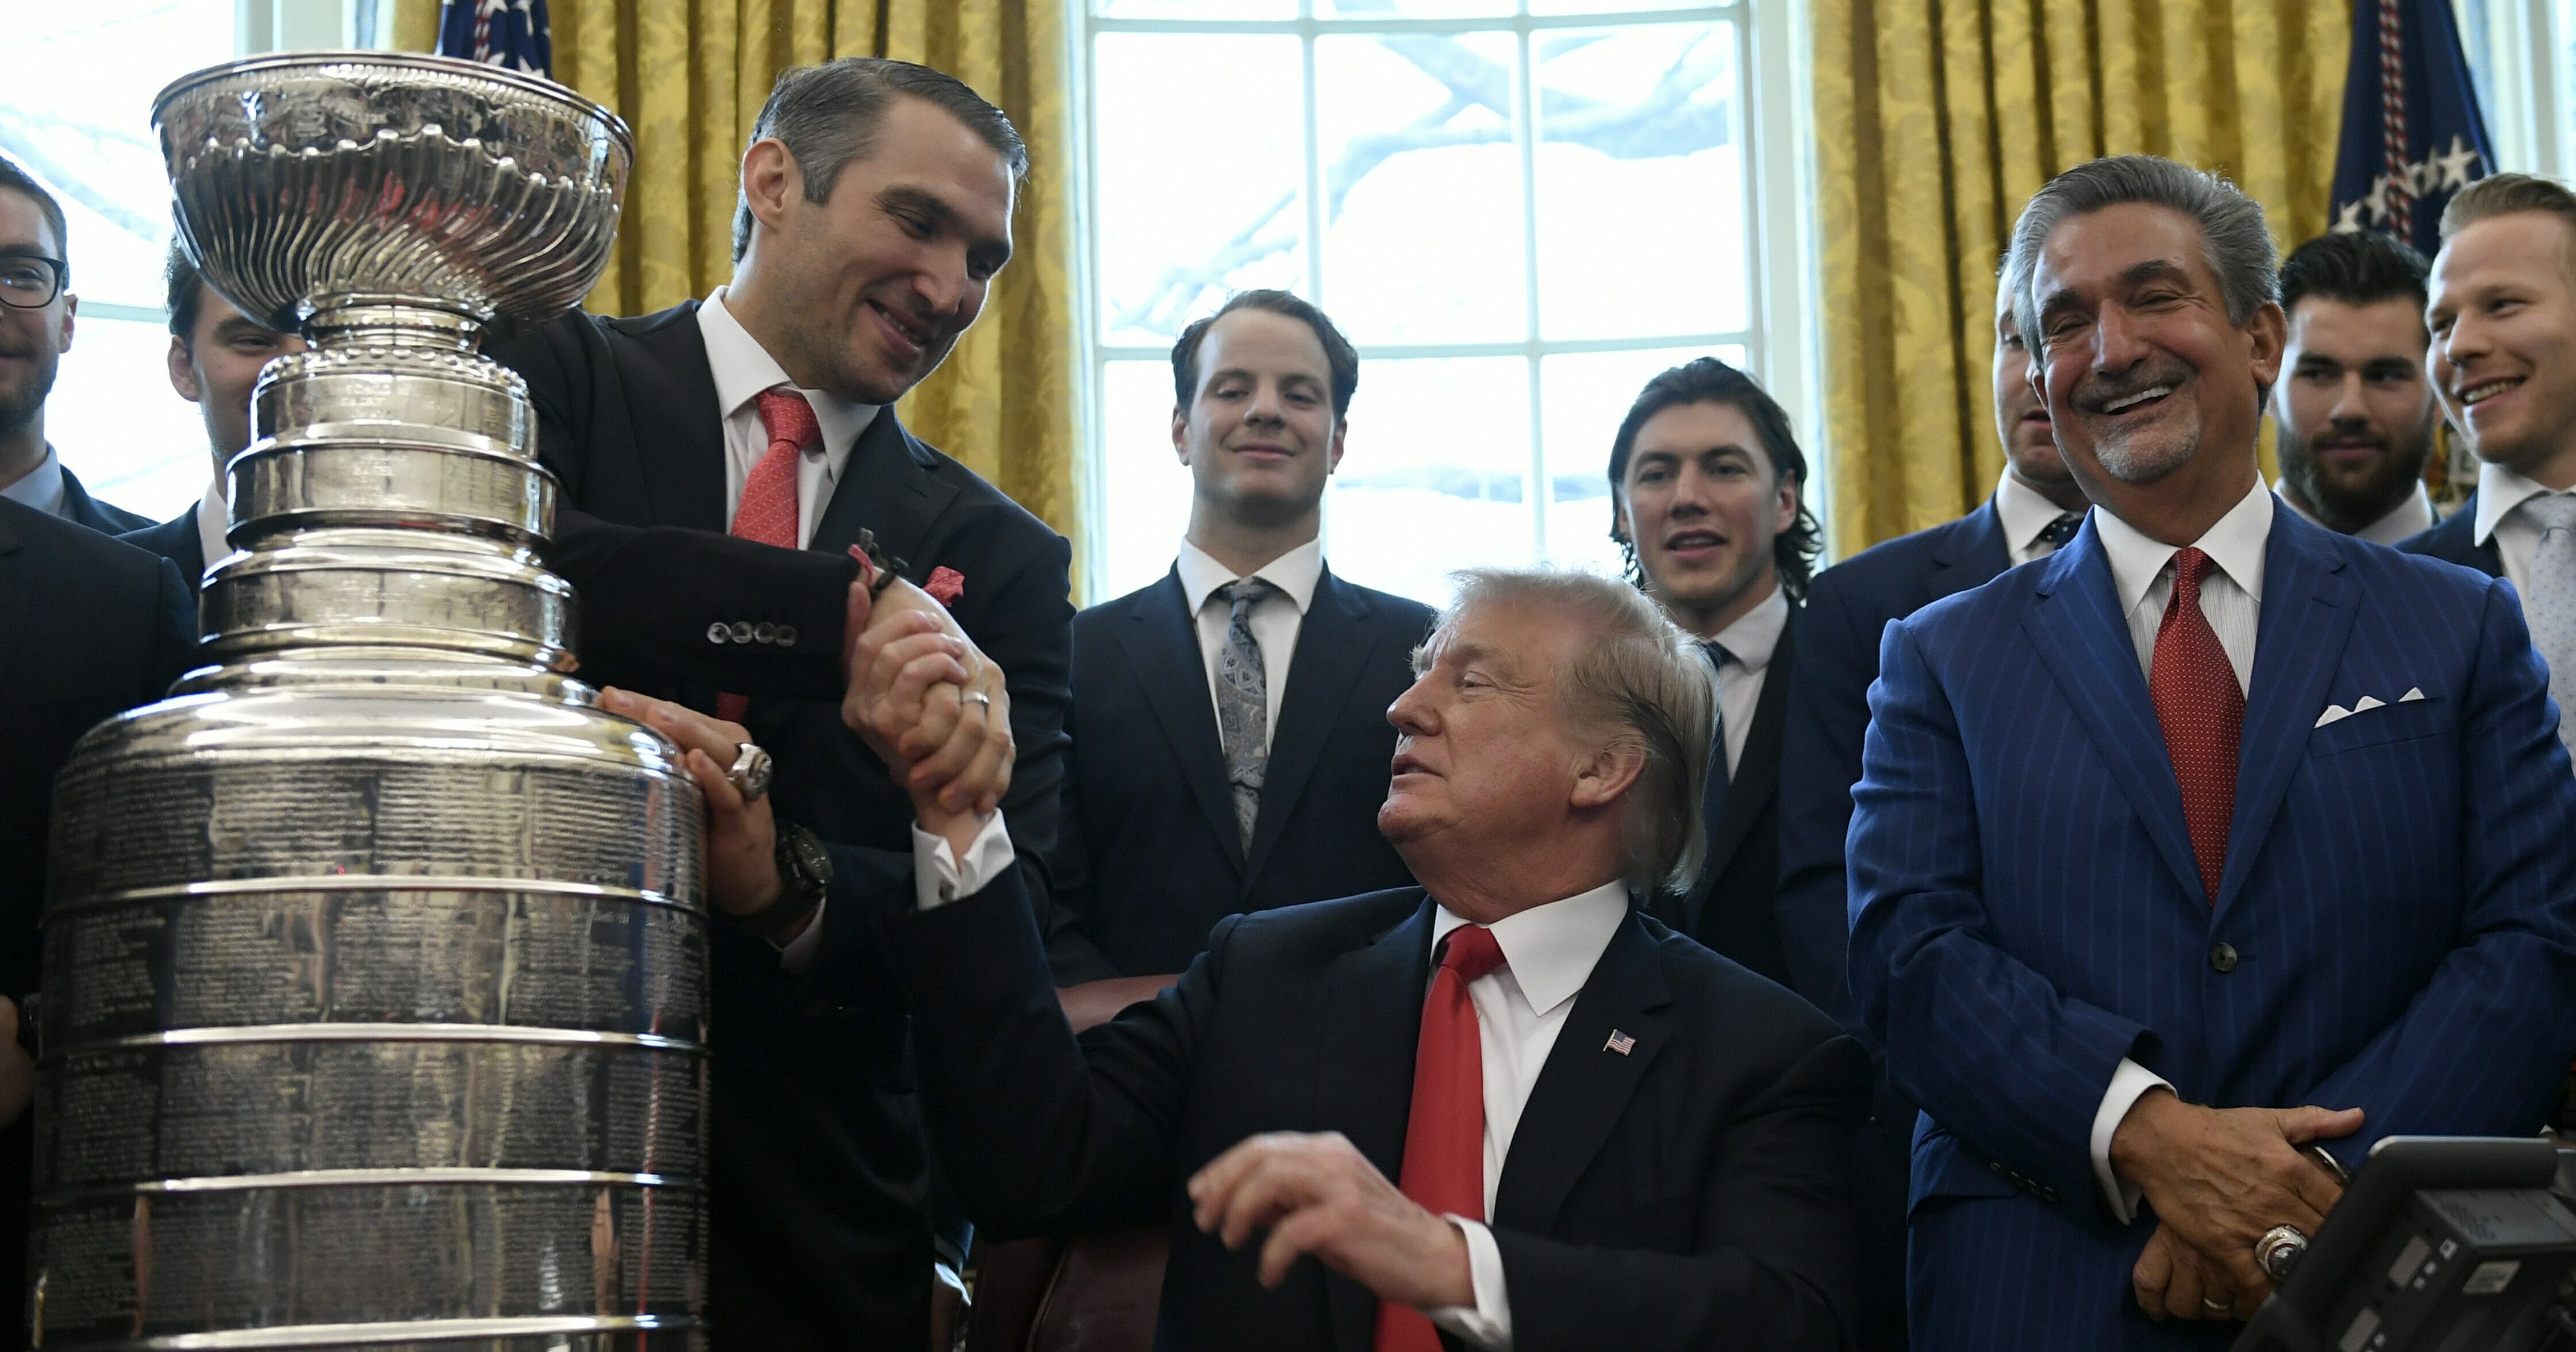 President Donald Trump, center, shakes hands with Alex Ovechkin, second from left, the captain and MVP of the 2018 Stanley Cup Champion Washington Capitals hockey team, during a visit to the Oval Office of the White House in Washington, Monday, March 25, 2019.